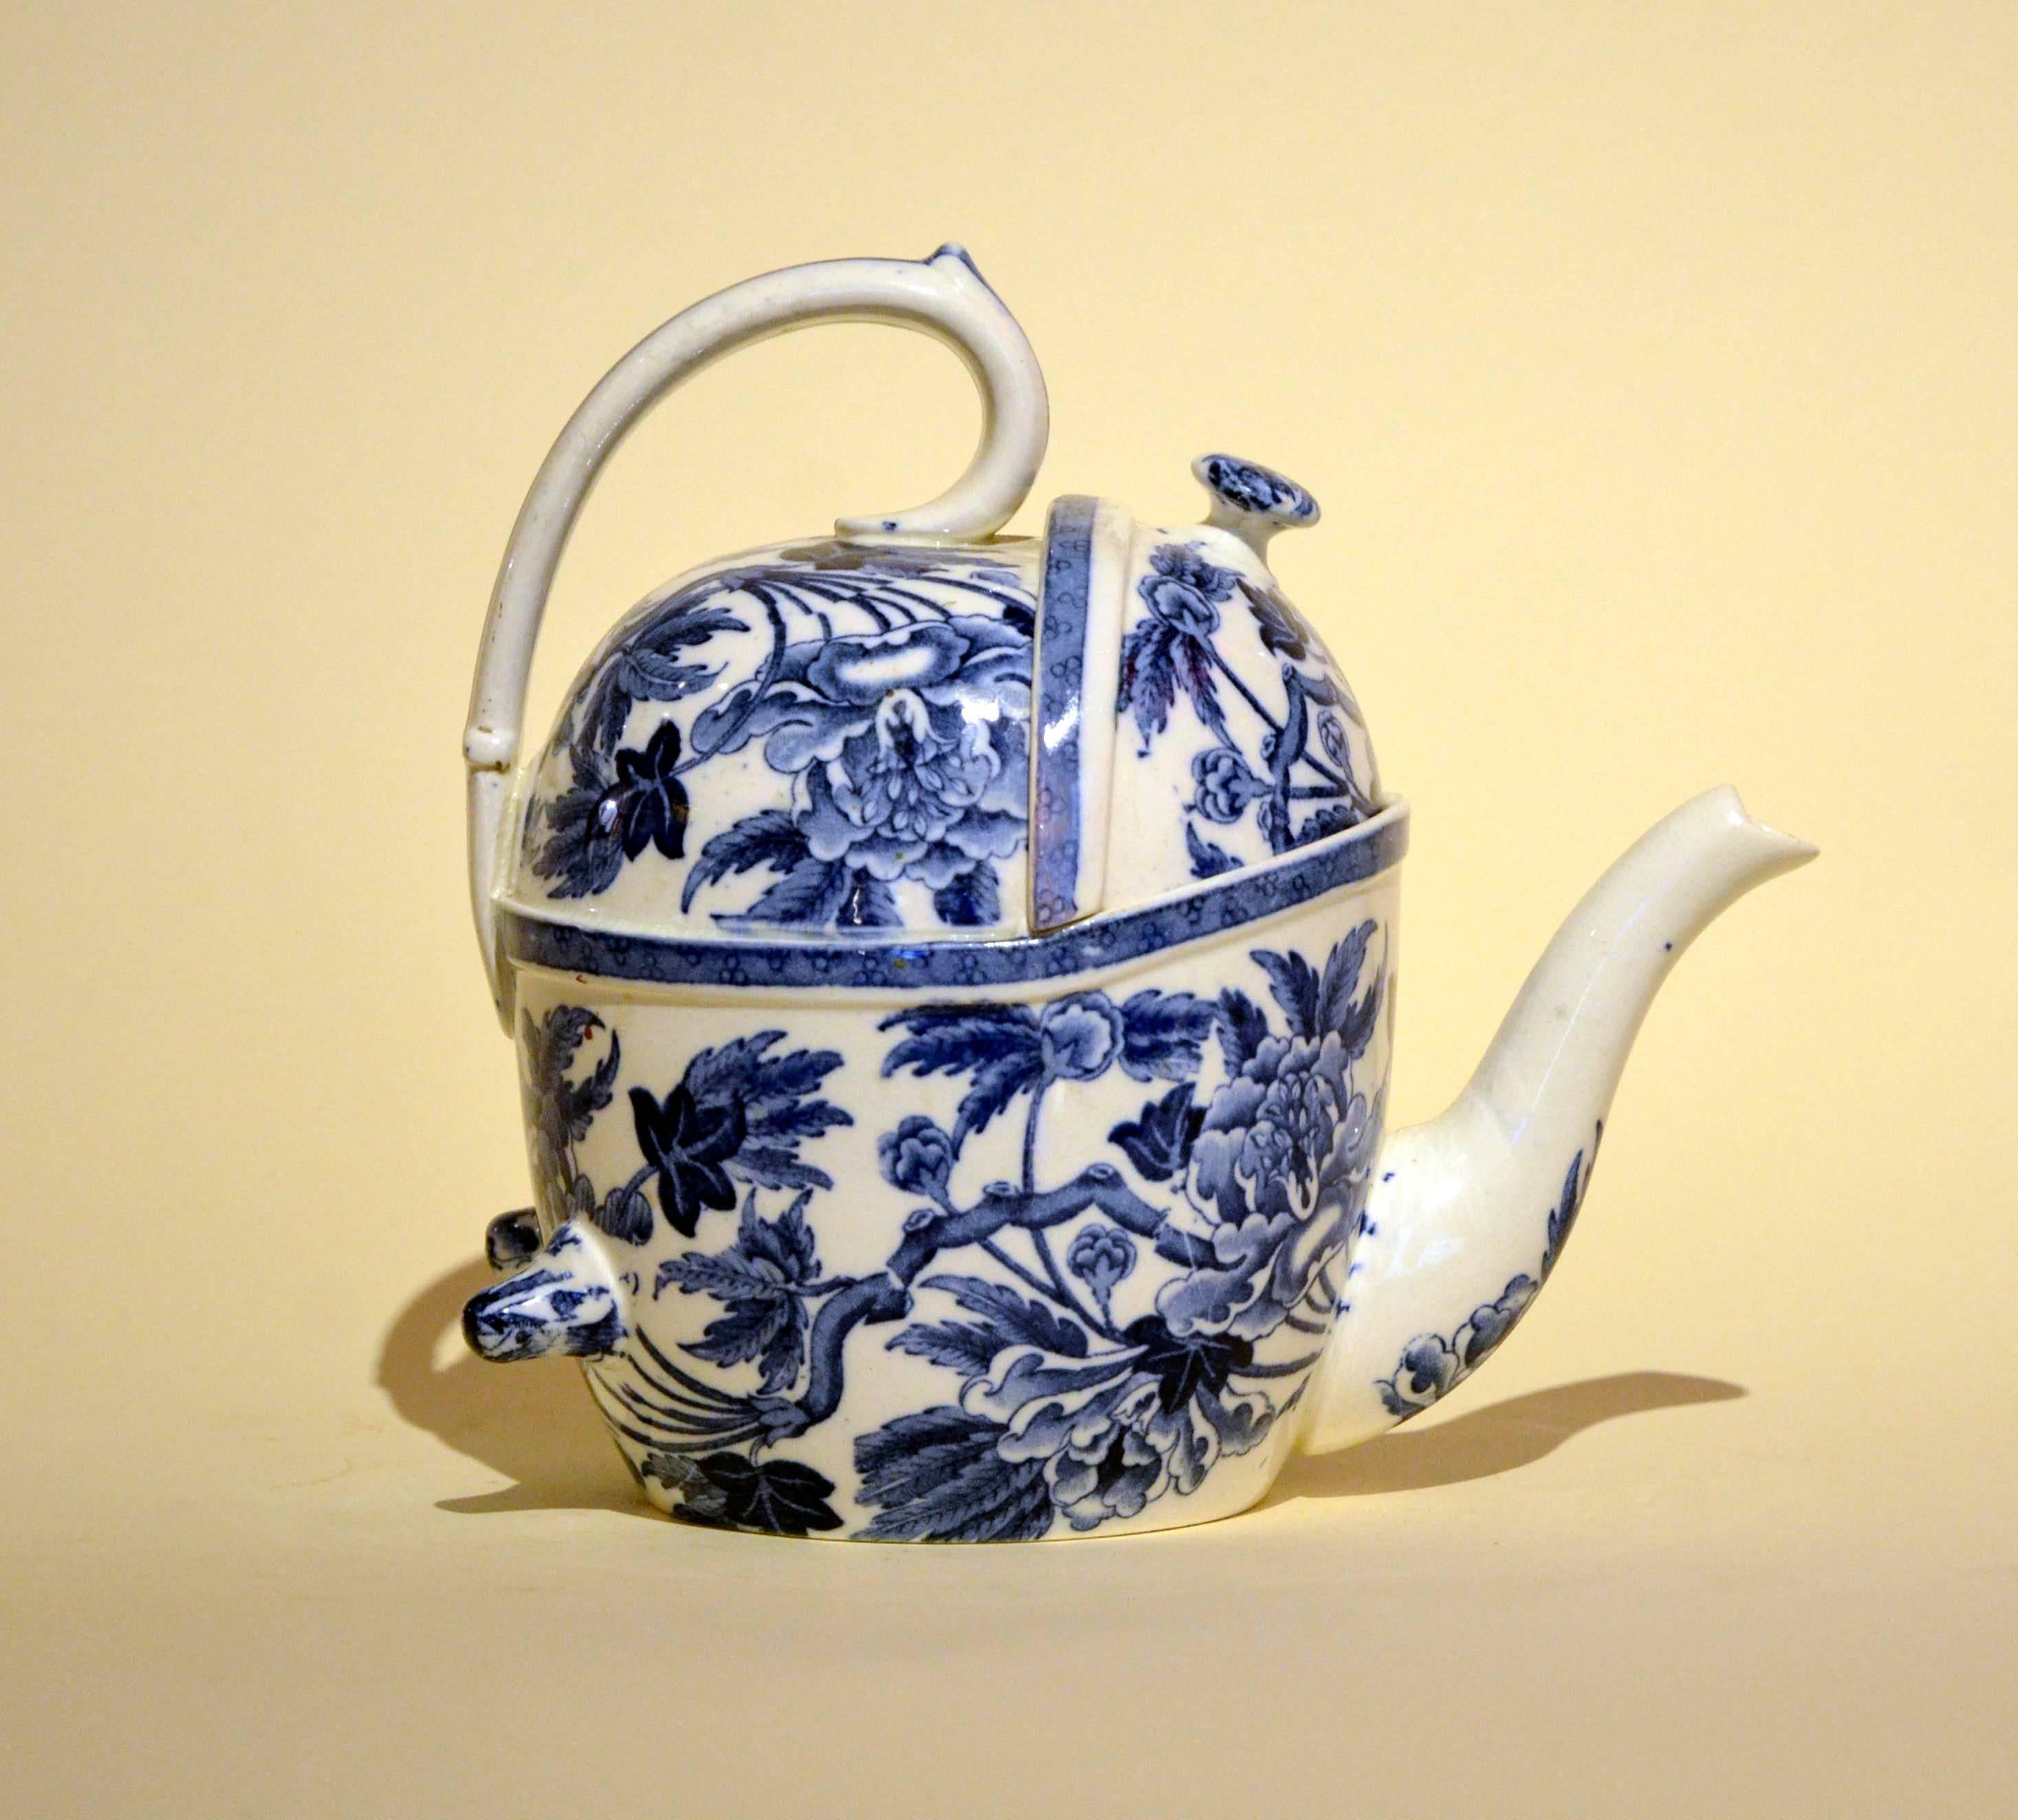 Early 20th Century 1900s S.Y.P. Simple Yet Perfect Peony Wedgwood Patent Teapot Made in England